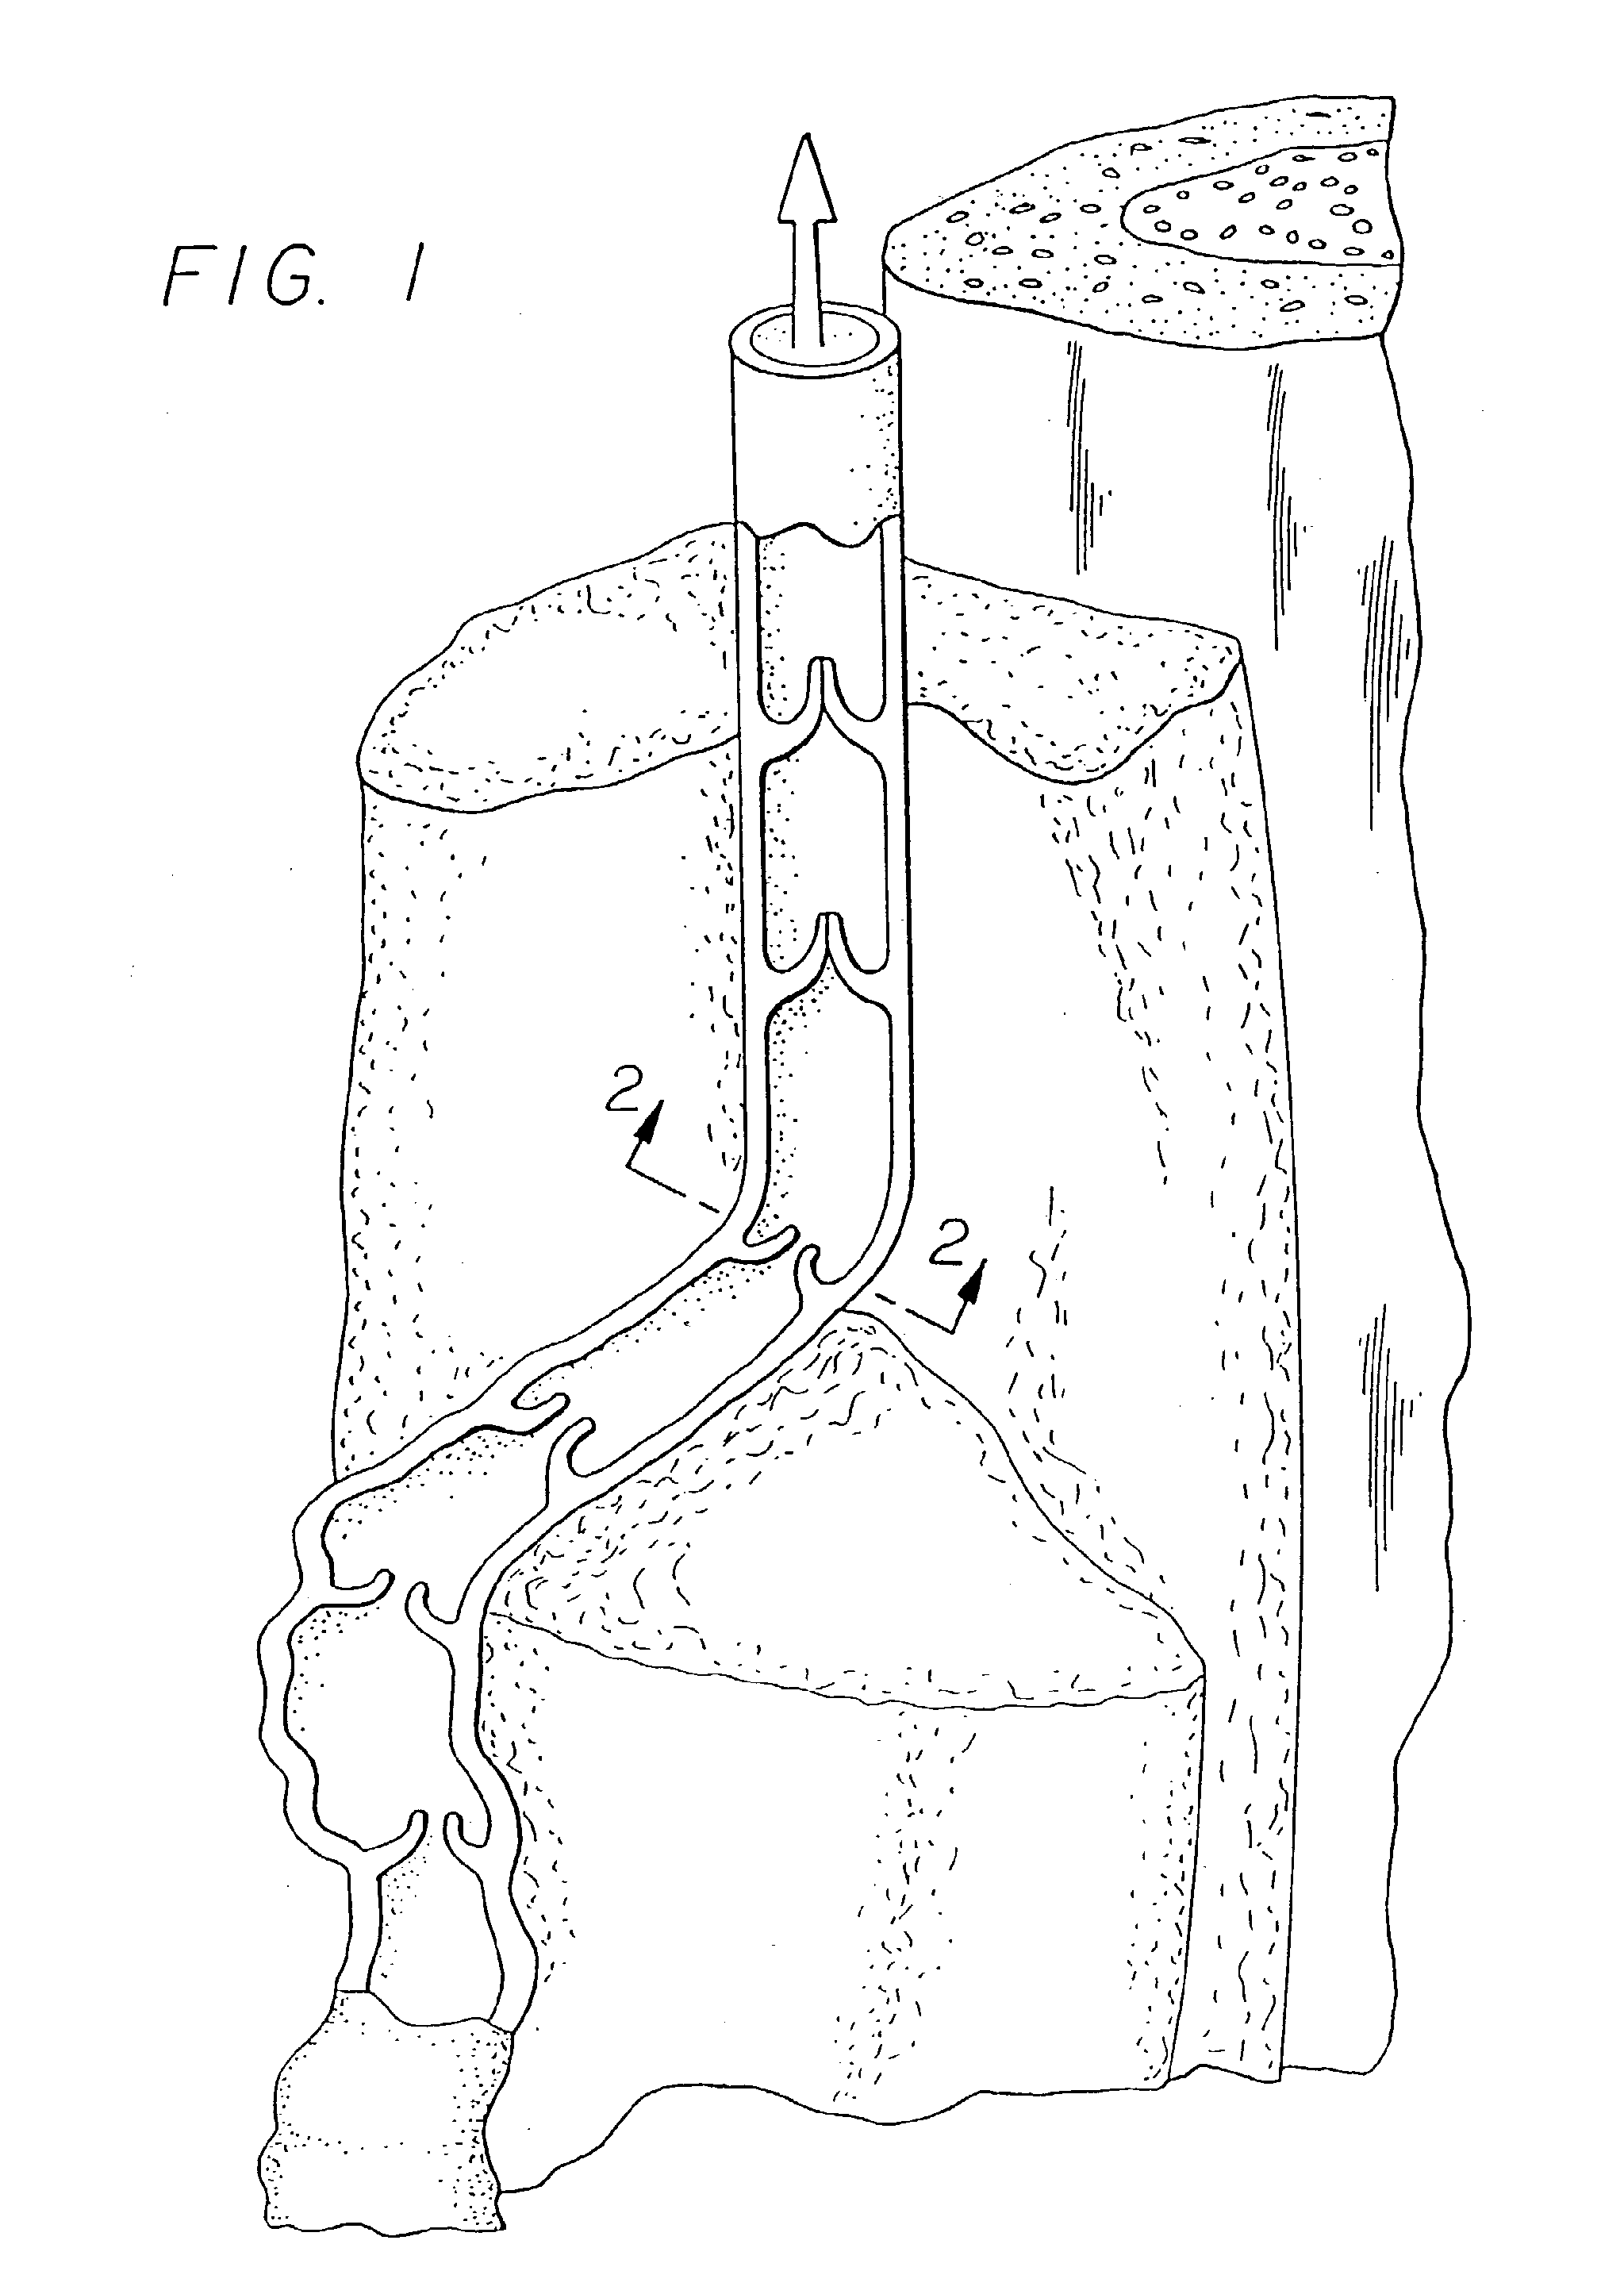 Apparatus for treating venous insufficiency